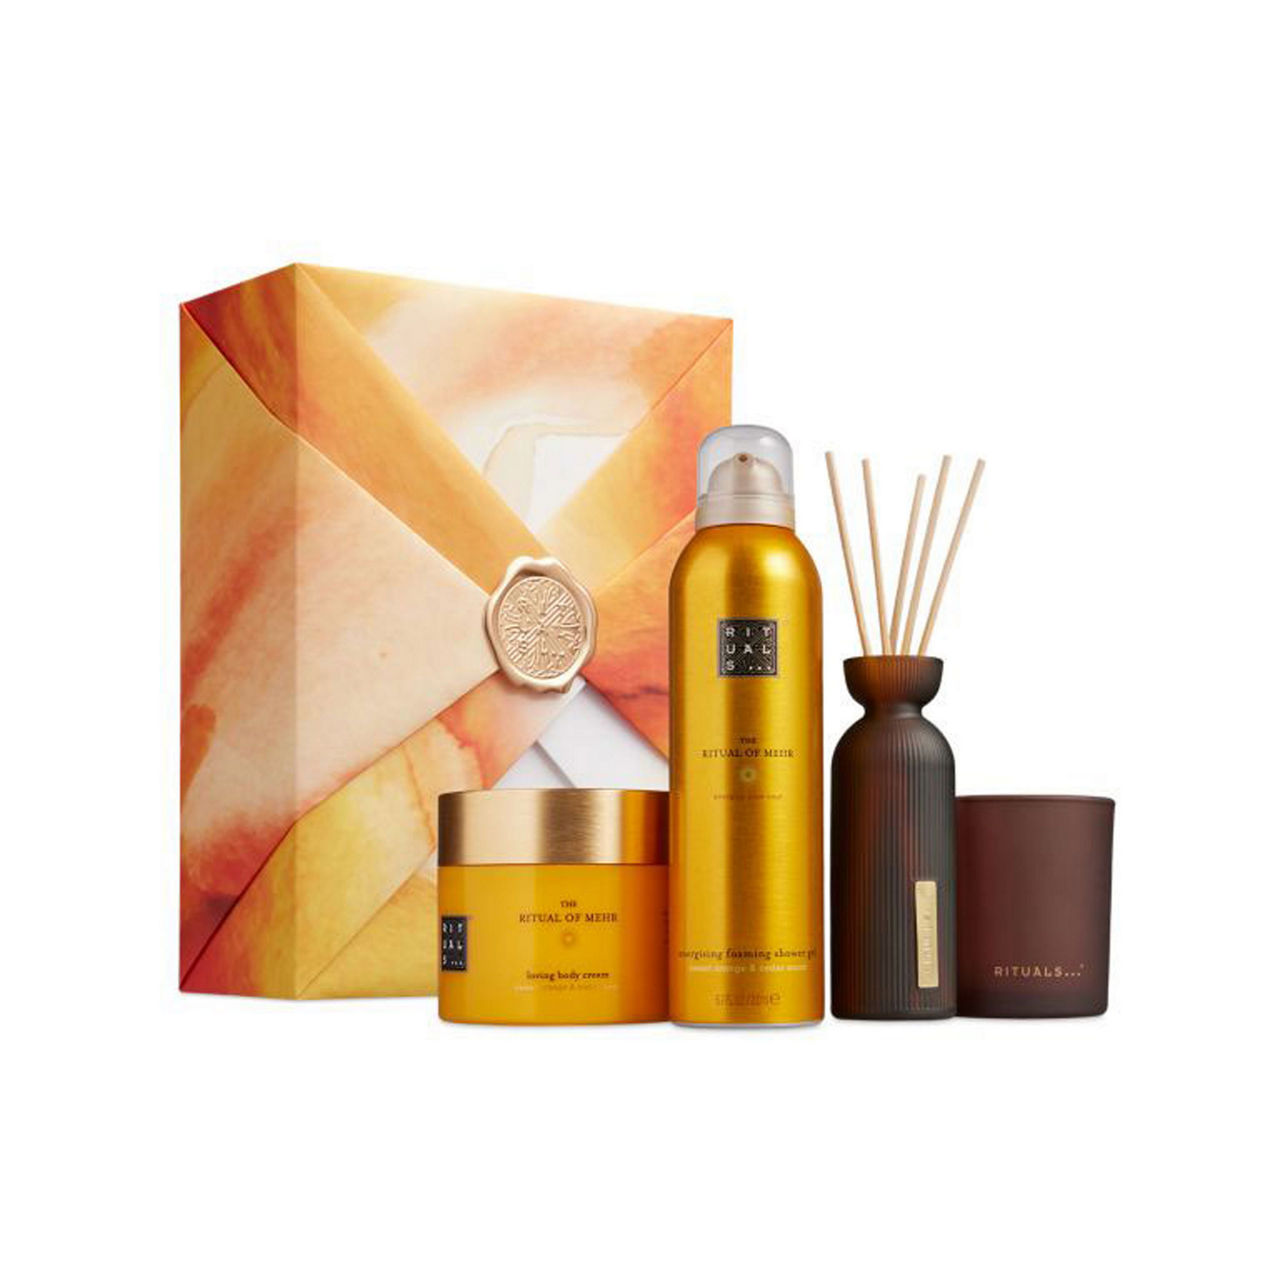 RITUALS The Ritual of Mehr - Large Gift Set